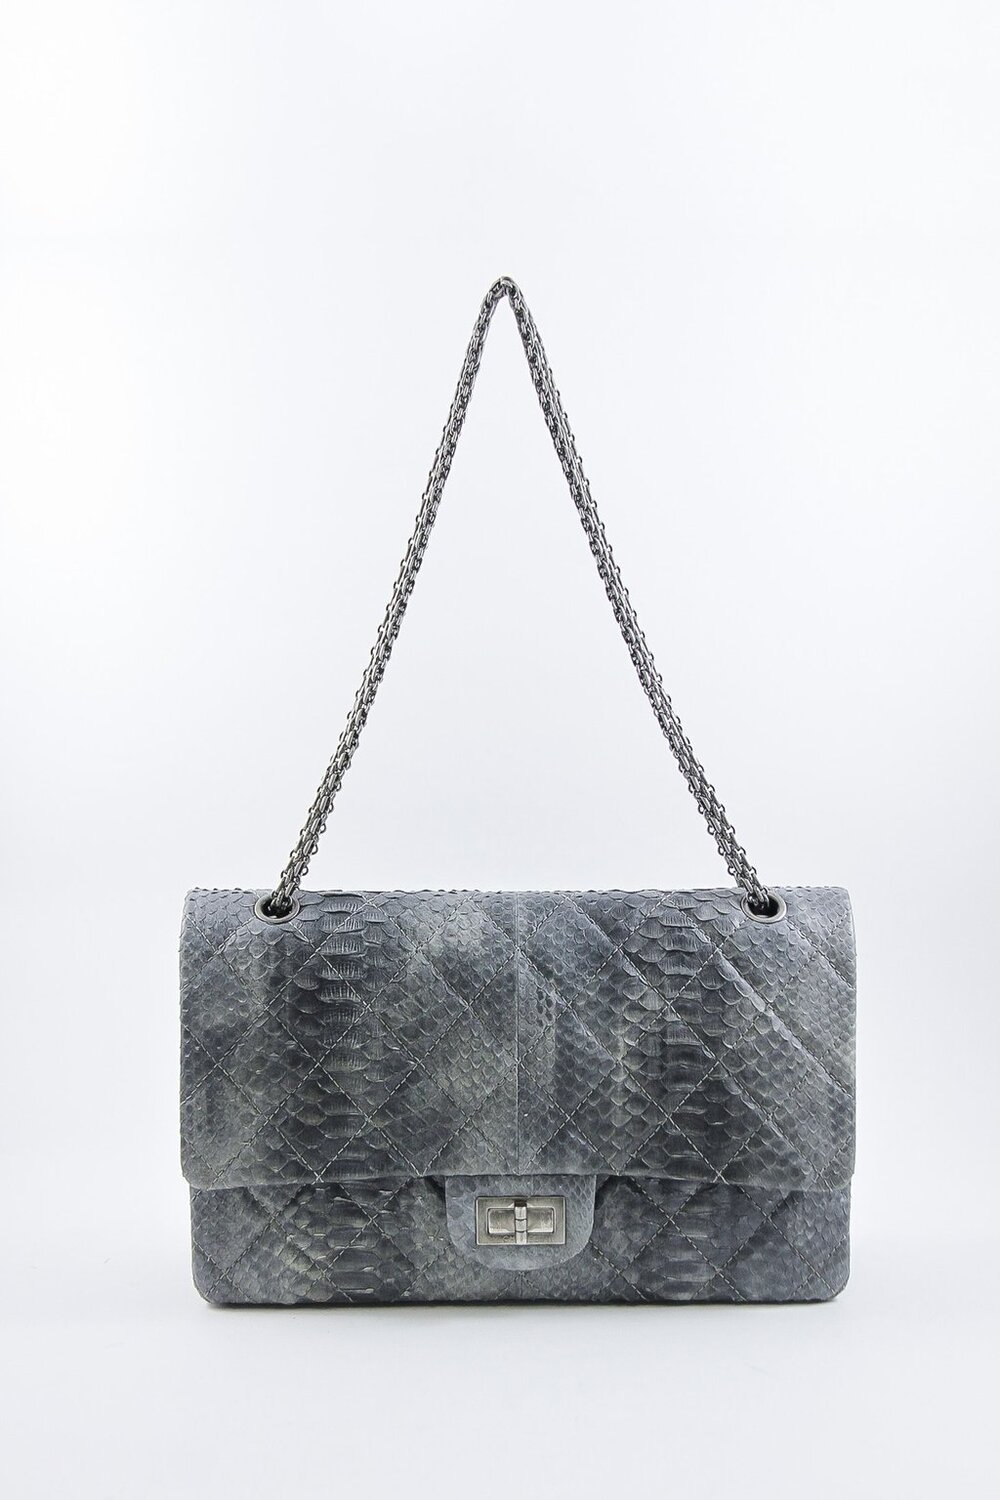 Chanel  Reissue Quilted Phyton Double Flap Bag 277 Gray SHW — DESIGNER  TAKEAWAY BY QUEEN OF LUXURY BOUTIQUE INC.